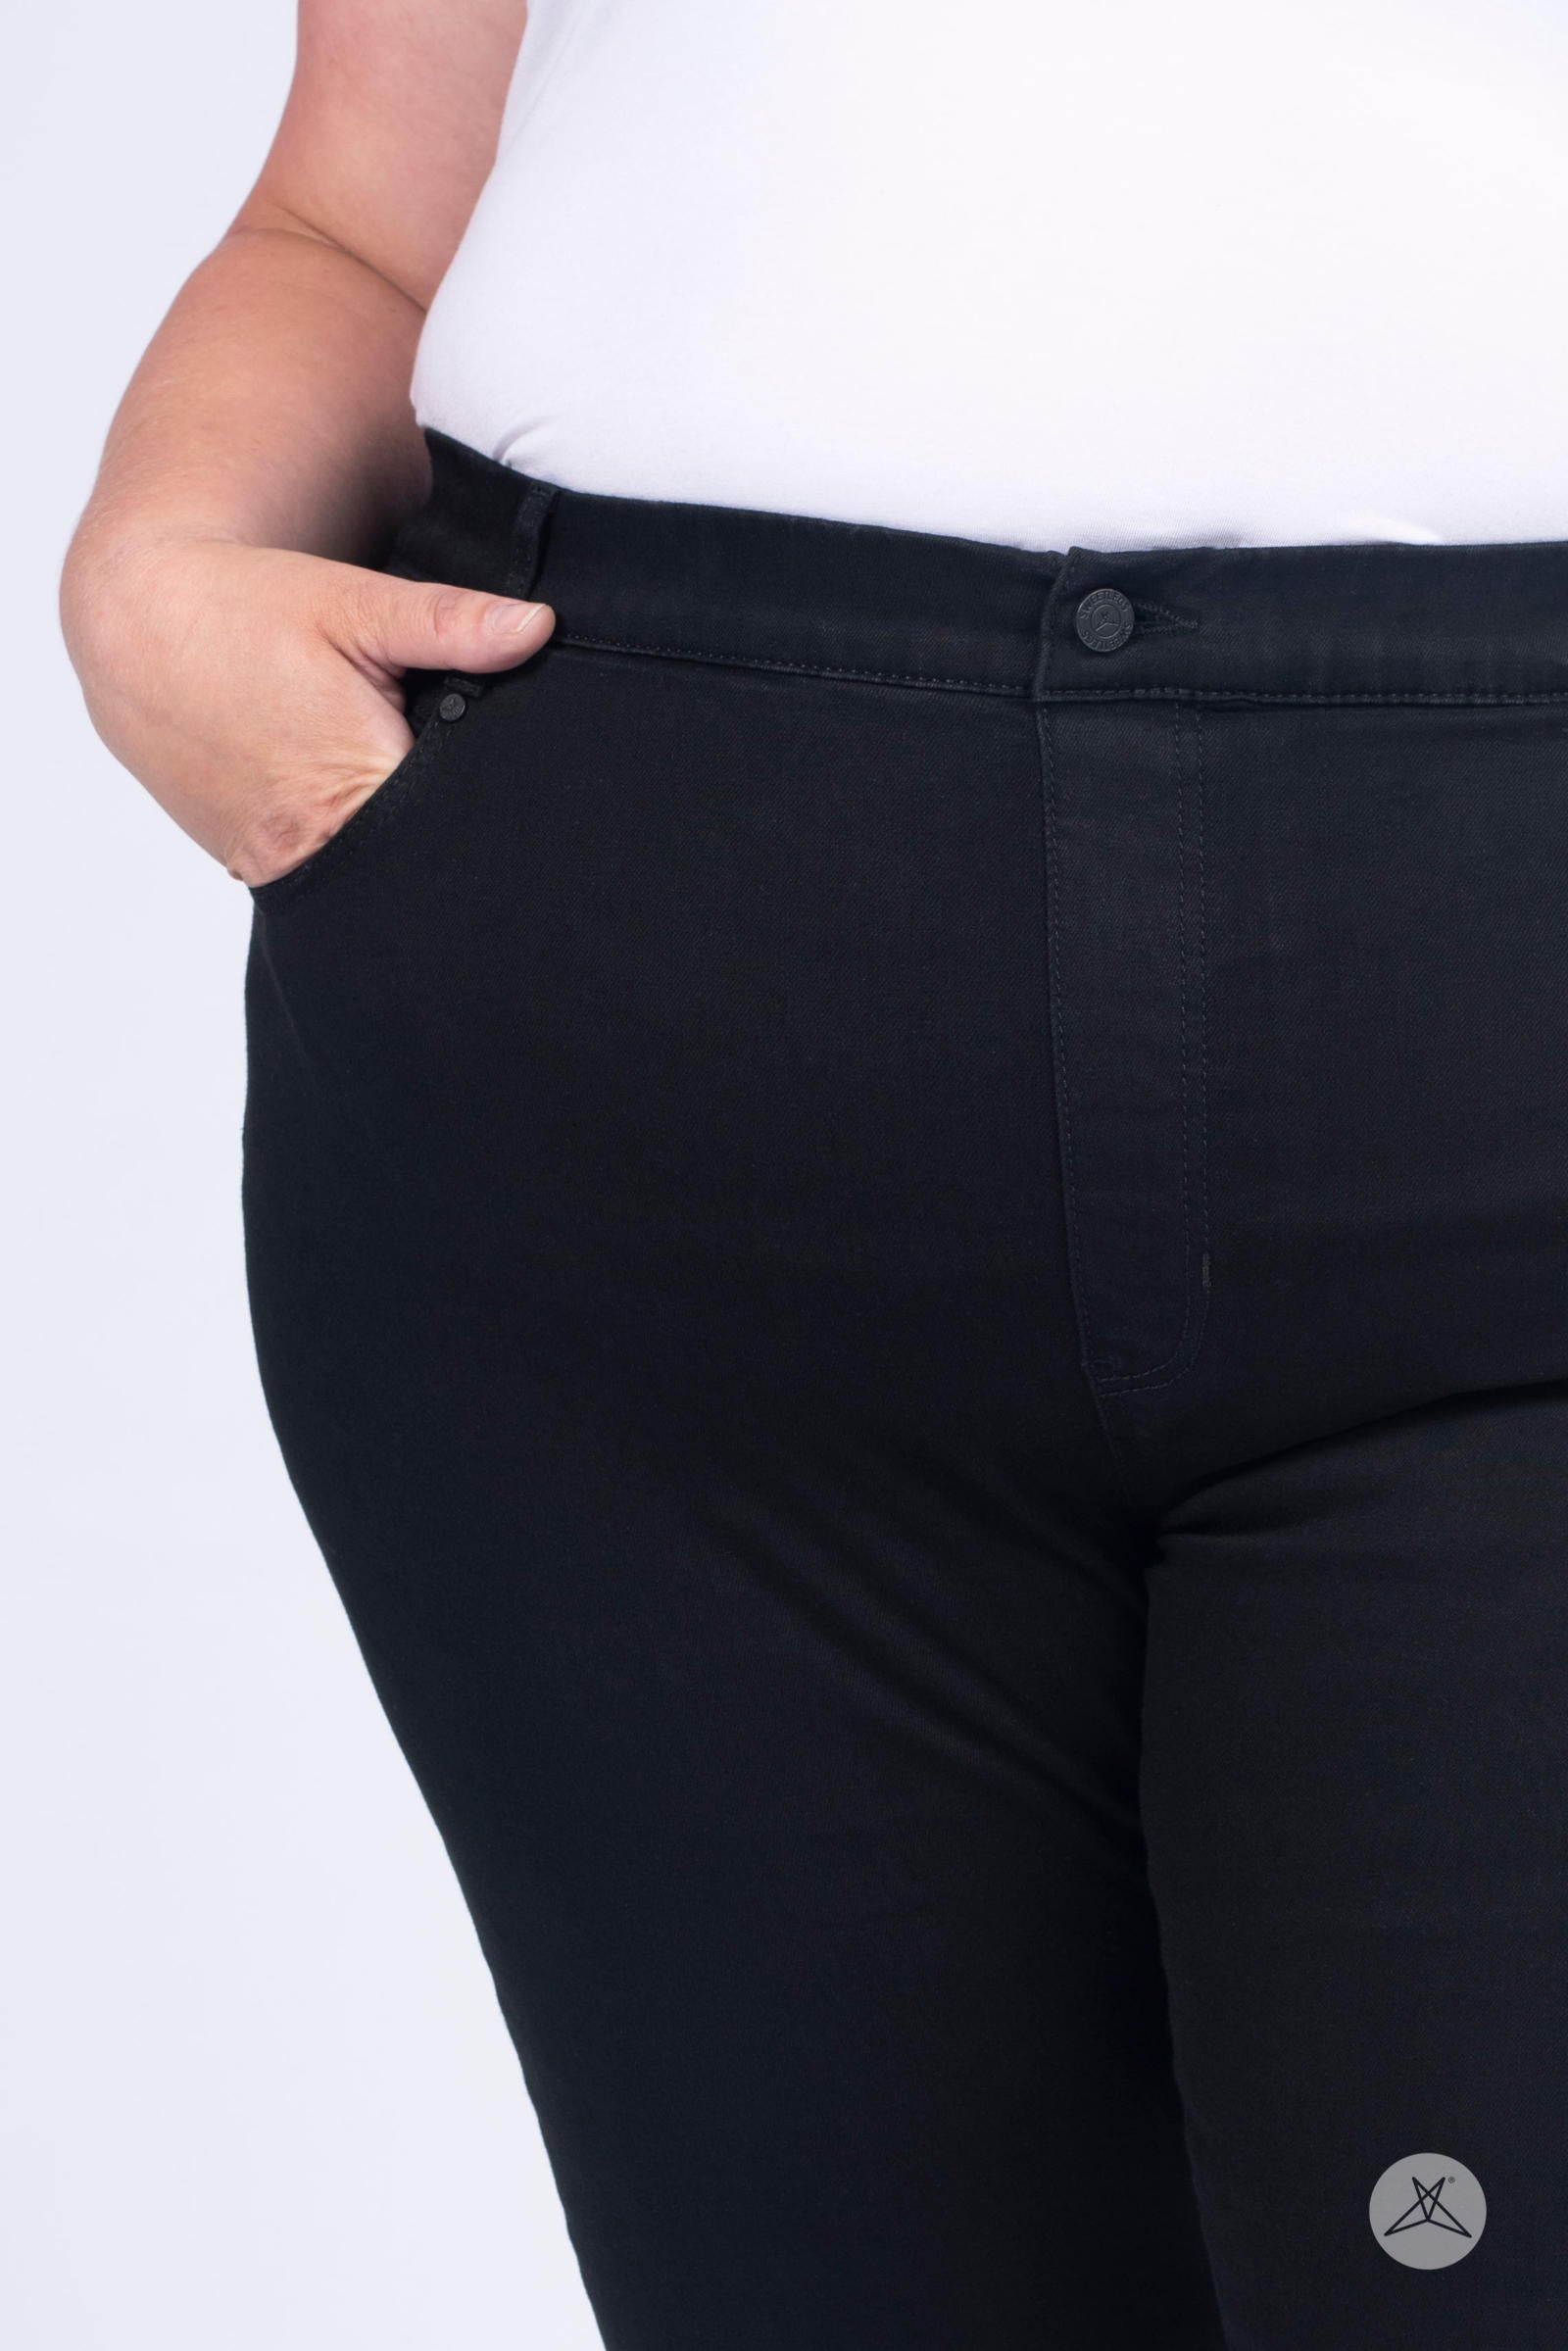 Black Stretchable Jeggings Pants For Women